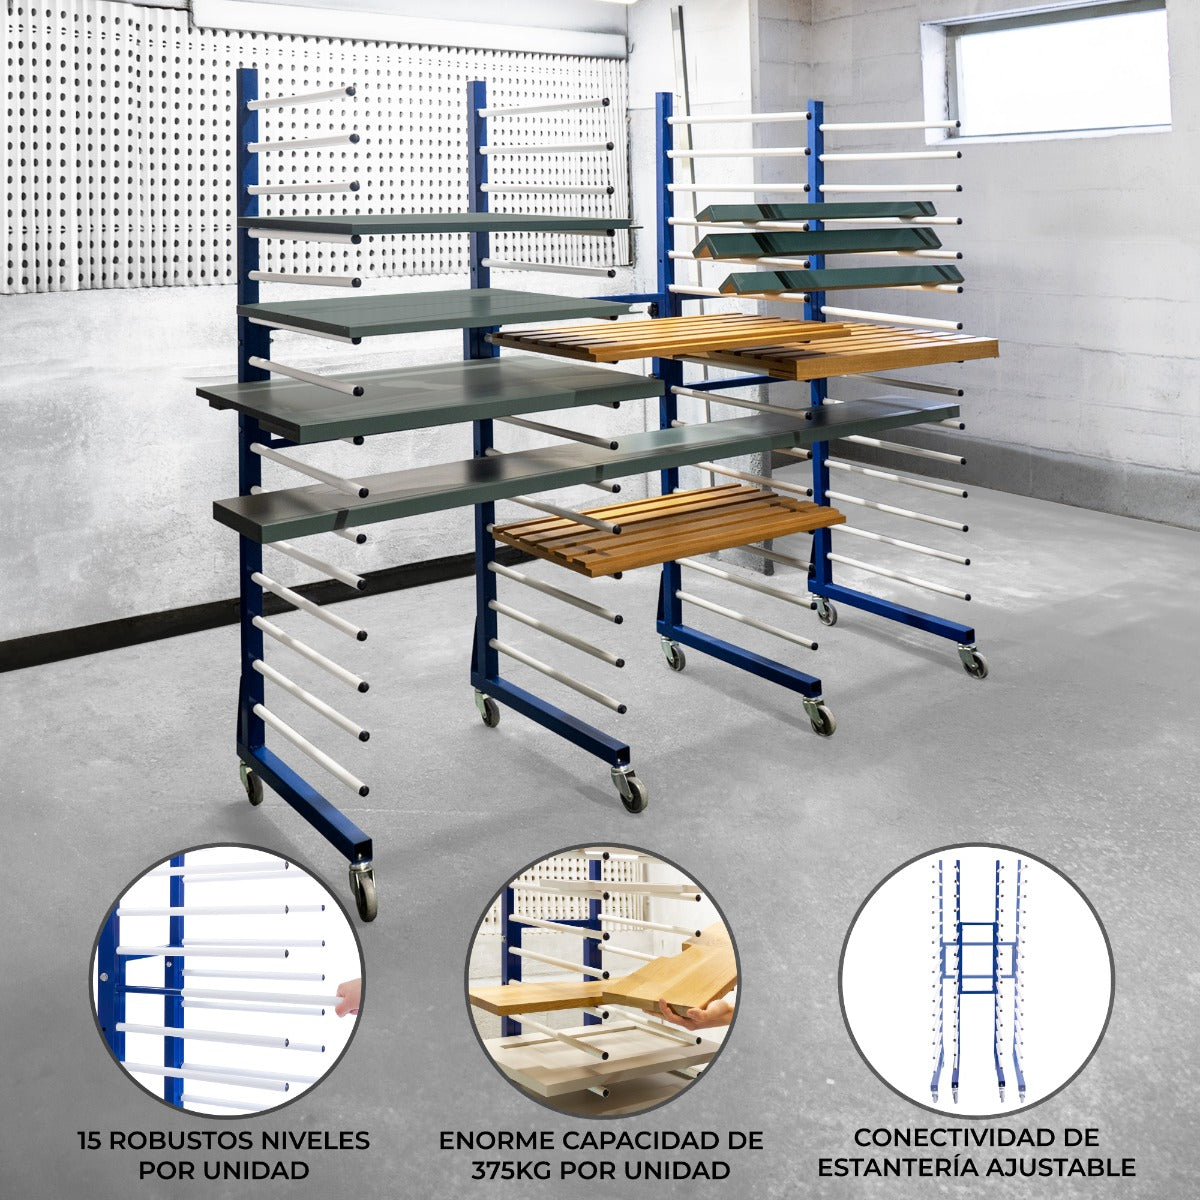 Combi Spray Drying Rack Trolley x 2 & Connector